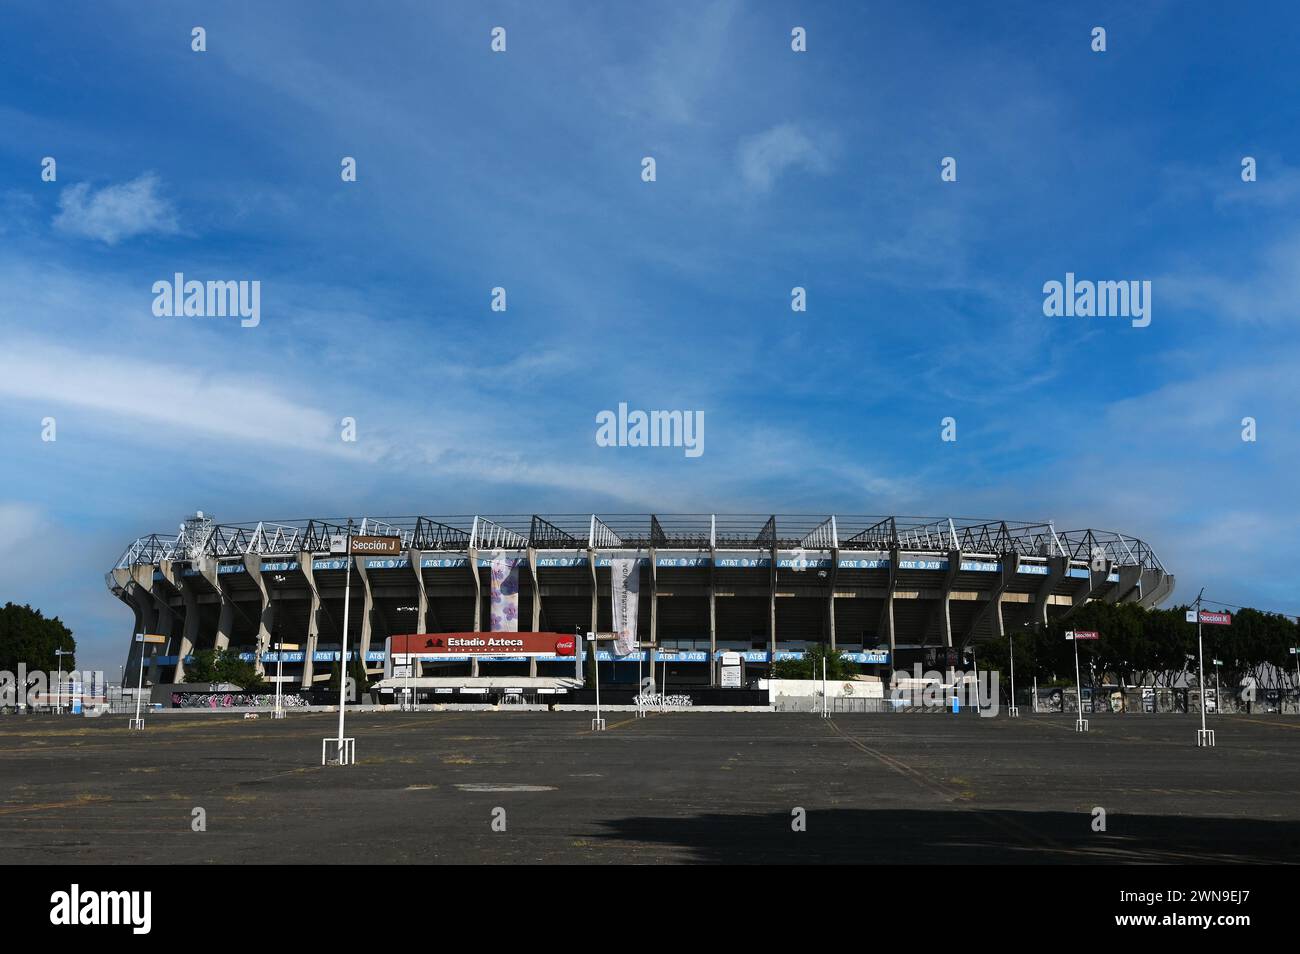 Estadio Azteca, Azteca Stadium, home of the Club America football club and venue for the opening match of the 2026 FIFA World Cup, Coyoacan, Mexico Stock Photo